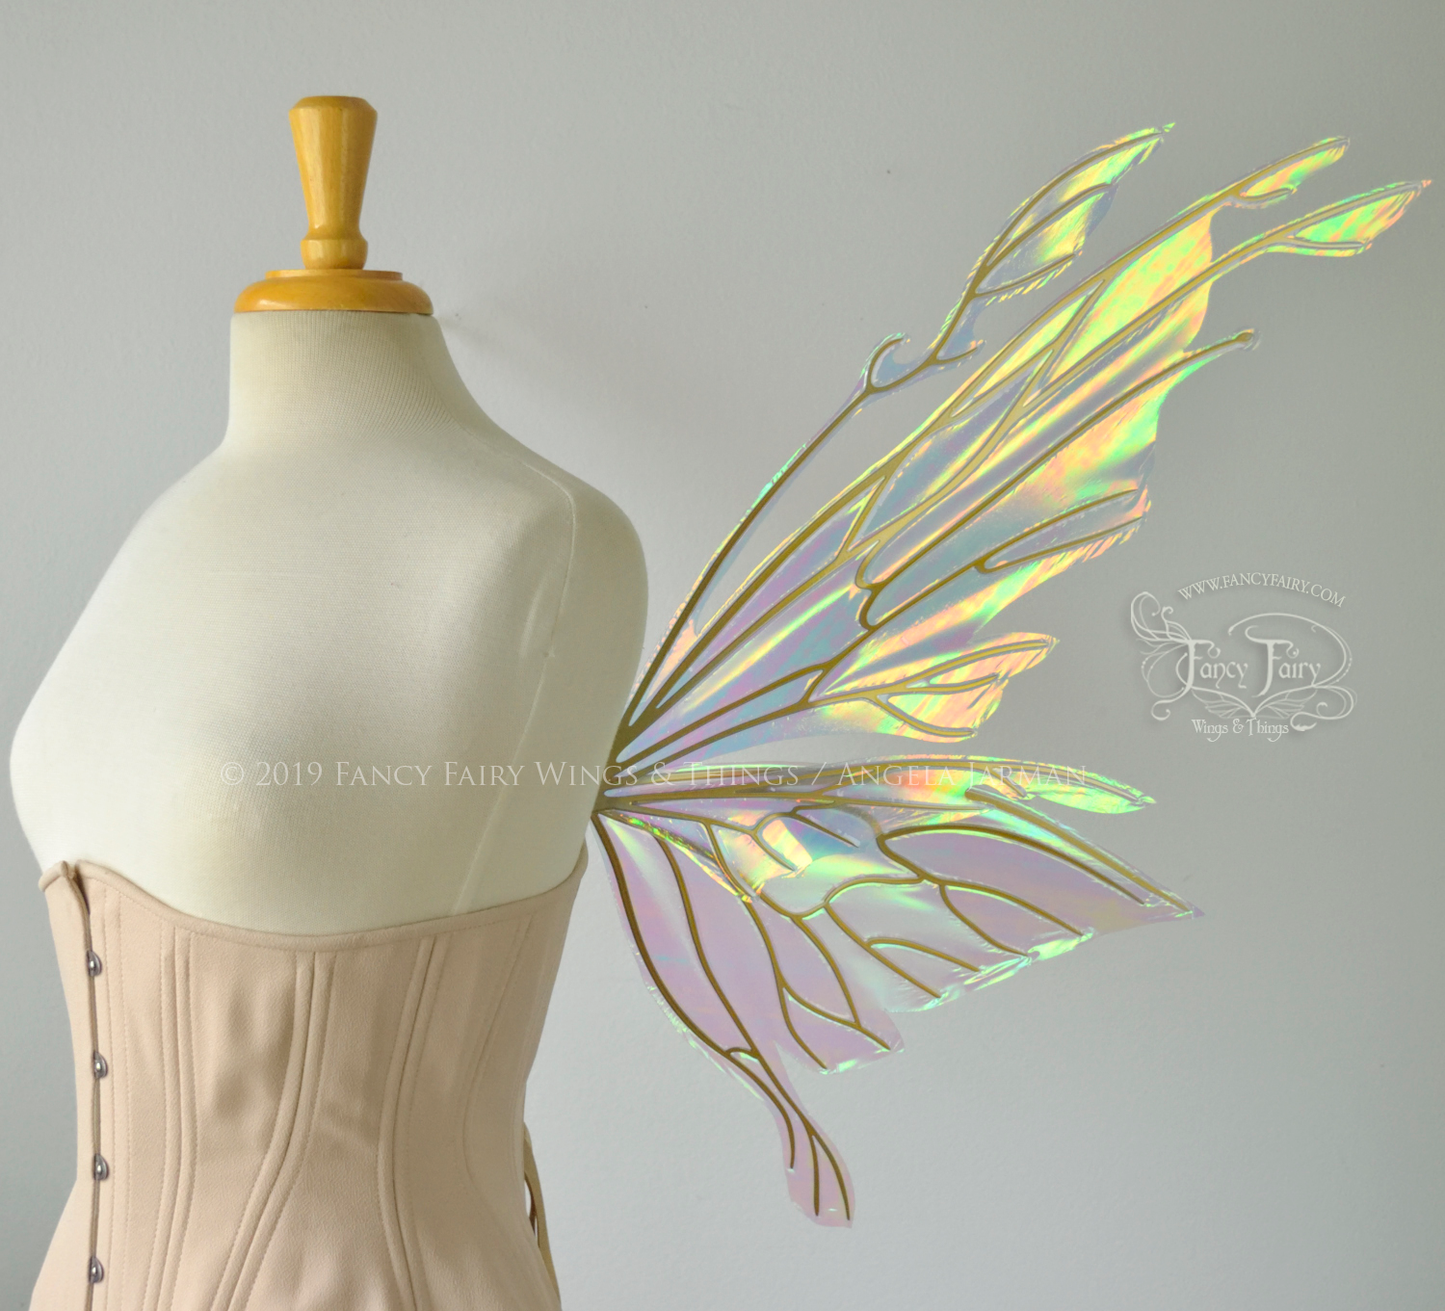 Goblin Princess Convertible Iridescent Fairy Wings in Satin White with Candy Gold Veins